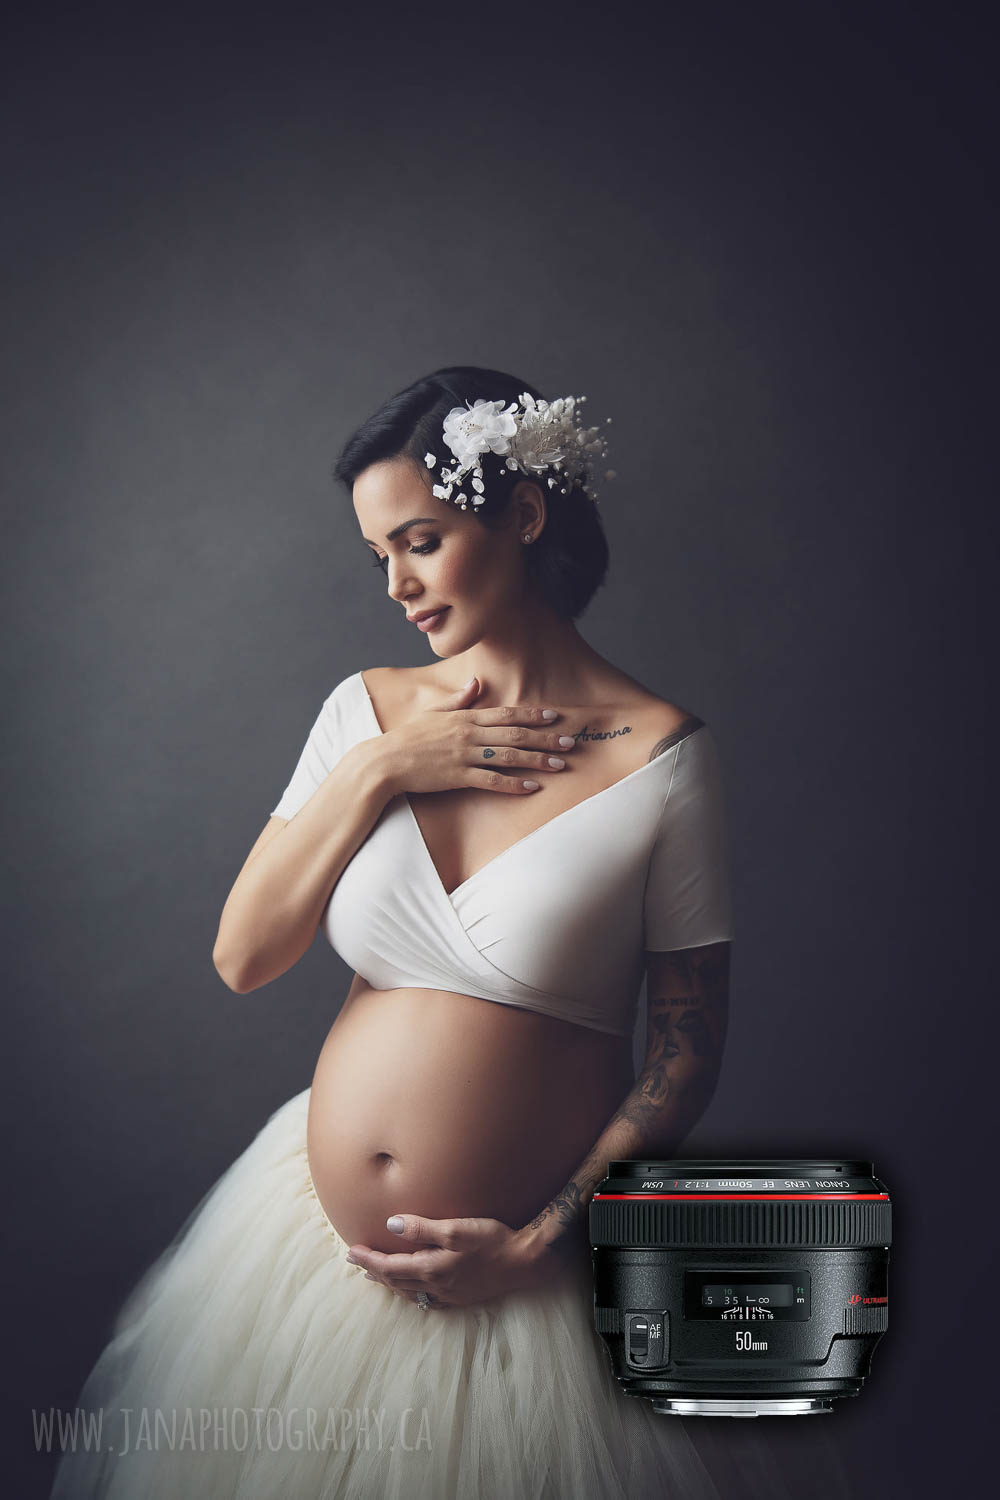 best lens for maternity photography - canon 50 mm f1.2